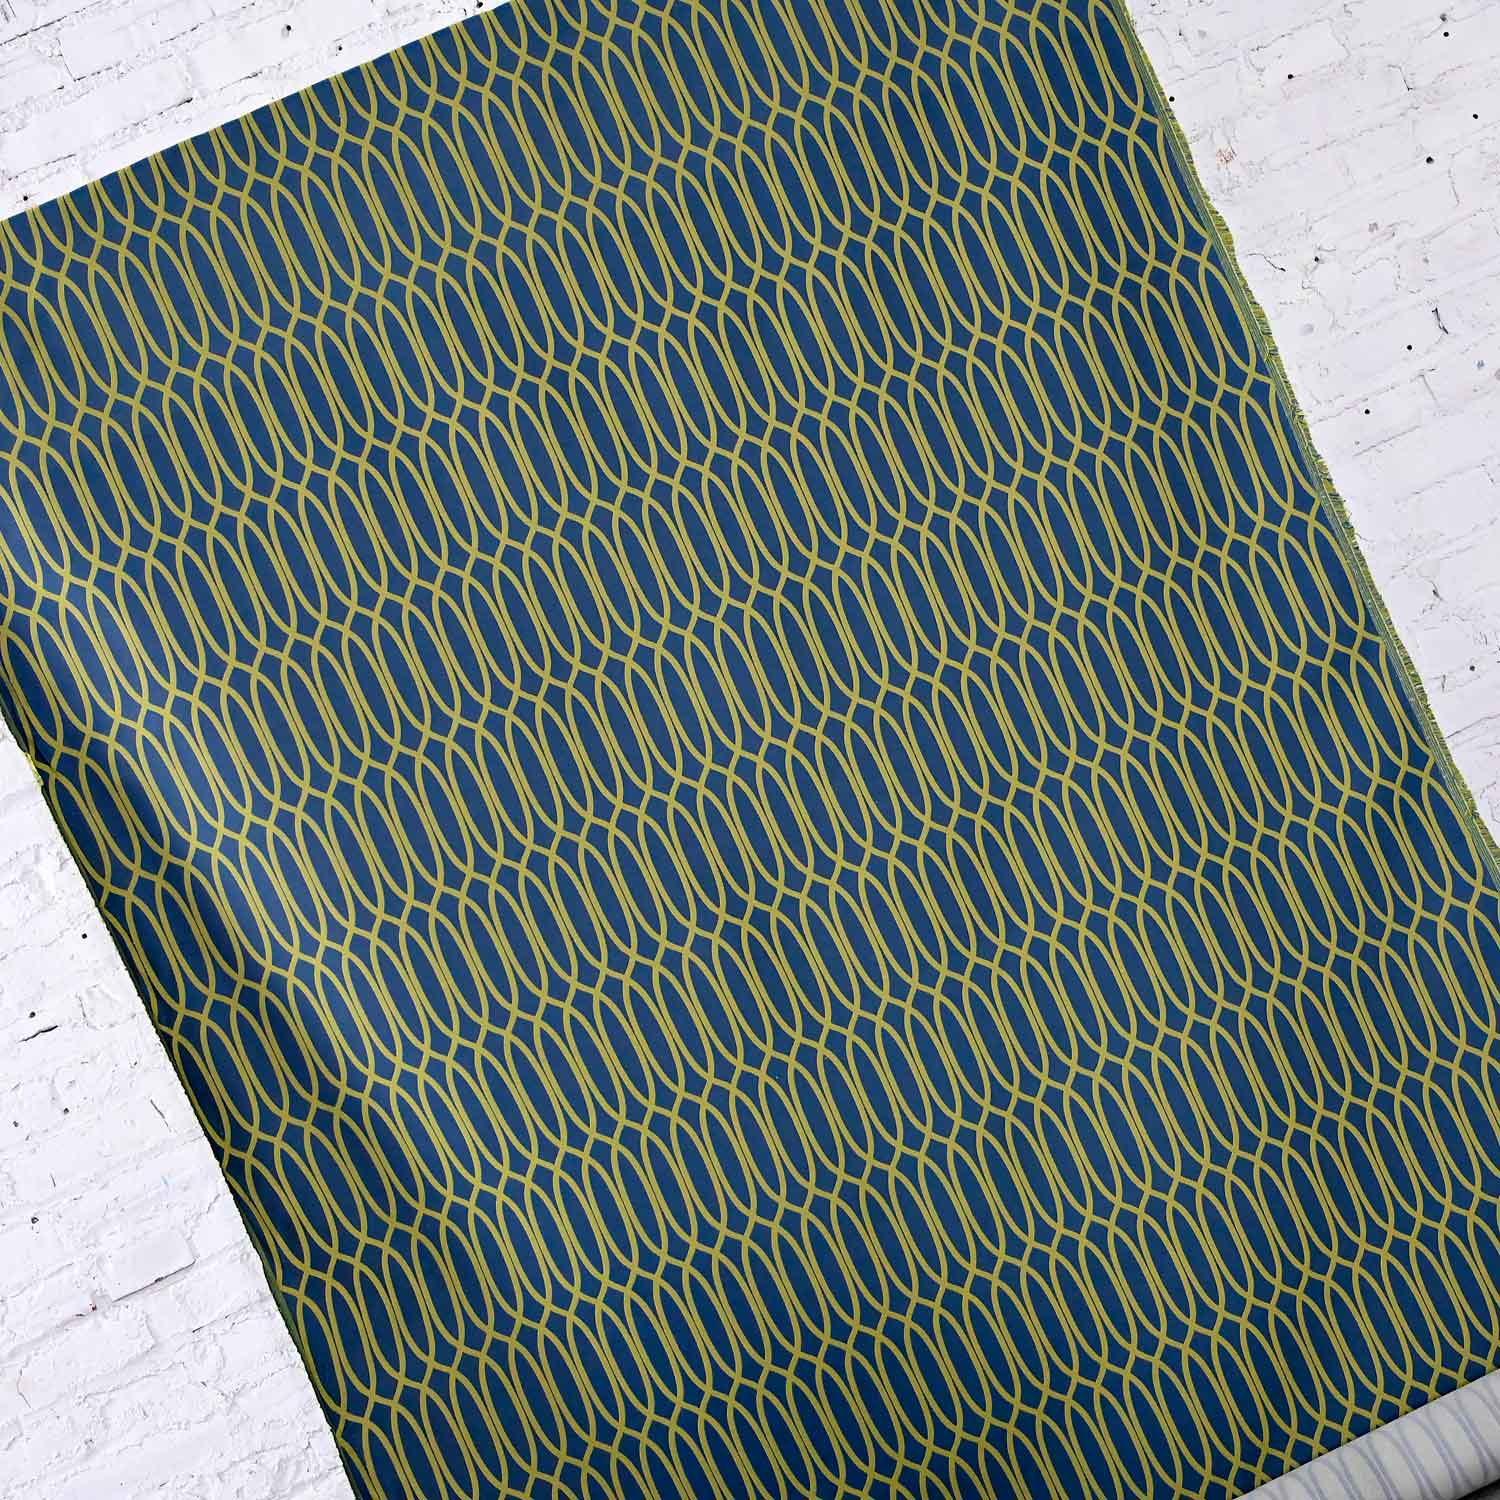 Gorgeous mid-century modern to modern style geometric blue and green Flection Plunge fabric bolt by Momentum Textiles. Beautiful condition. There is some soiling on the reverse of the fabric but does not show through to the front. Please see photos and zoom in for details. We attempt to portray any imperfections. Circa, 2016 NOTE: We have several items listed here that would look awesome reupholstered in this gorgeous fabric by Momentum Textiles!!